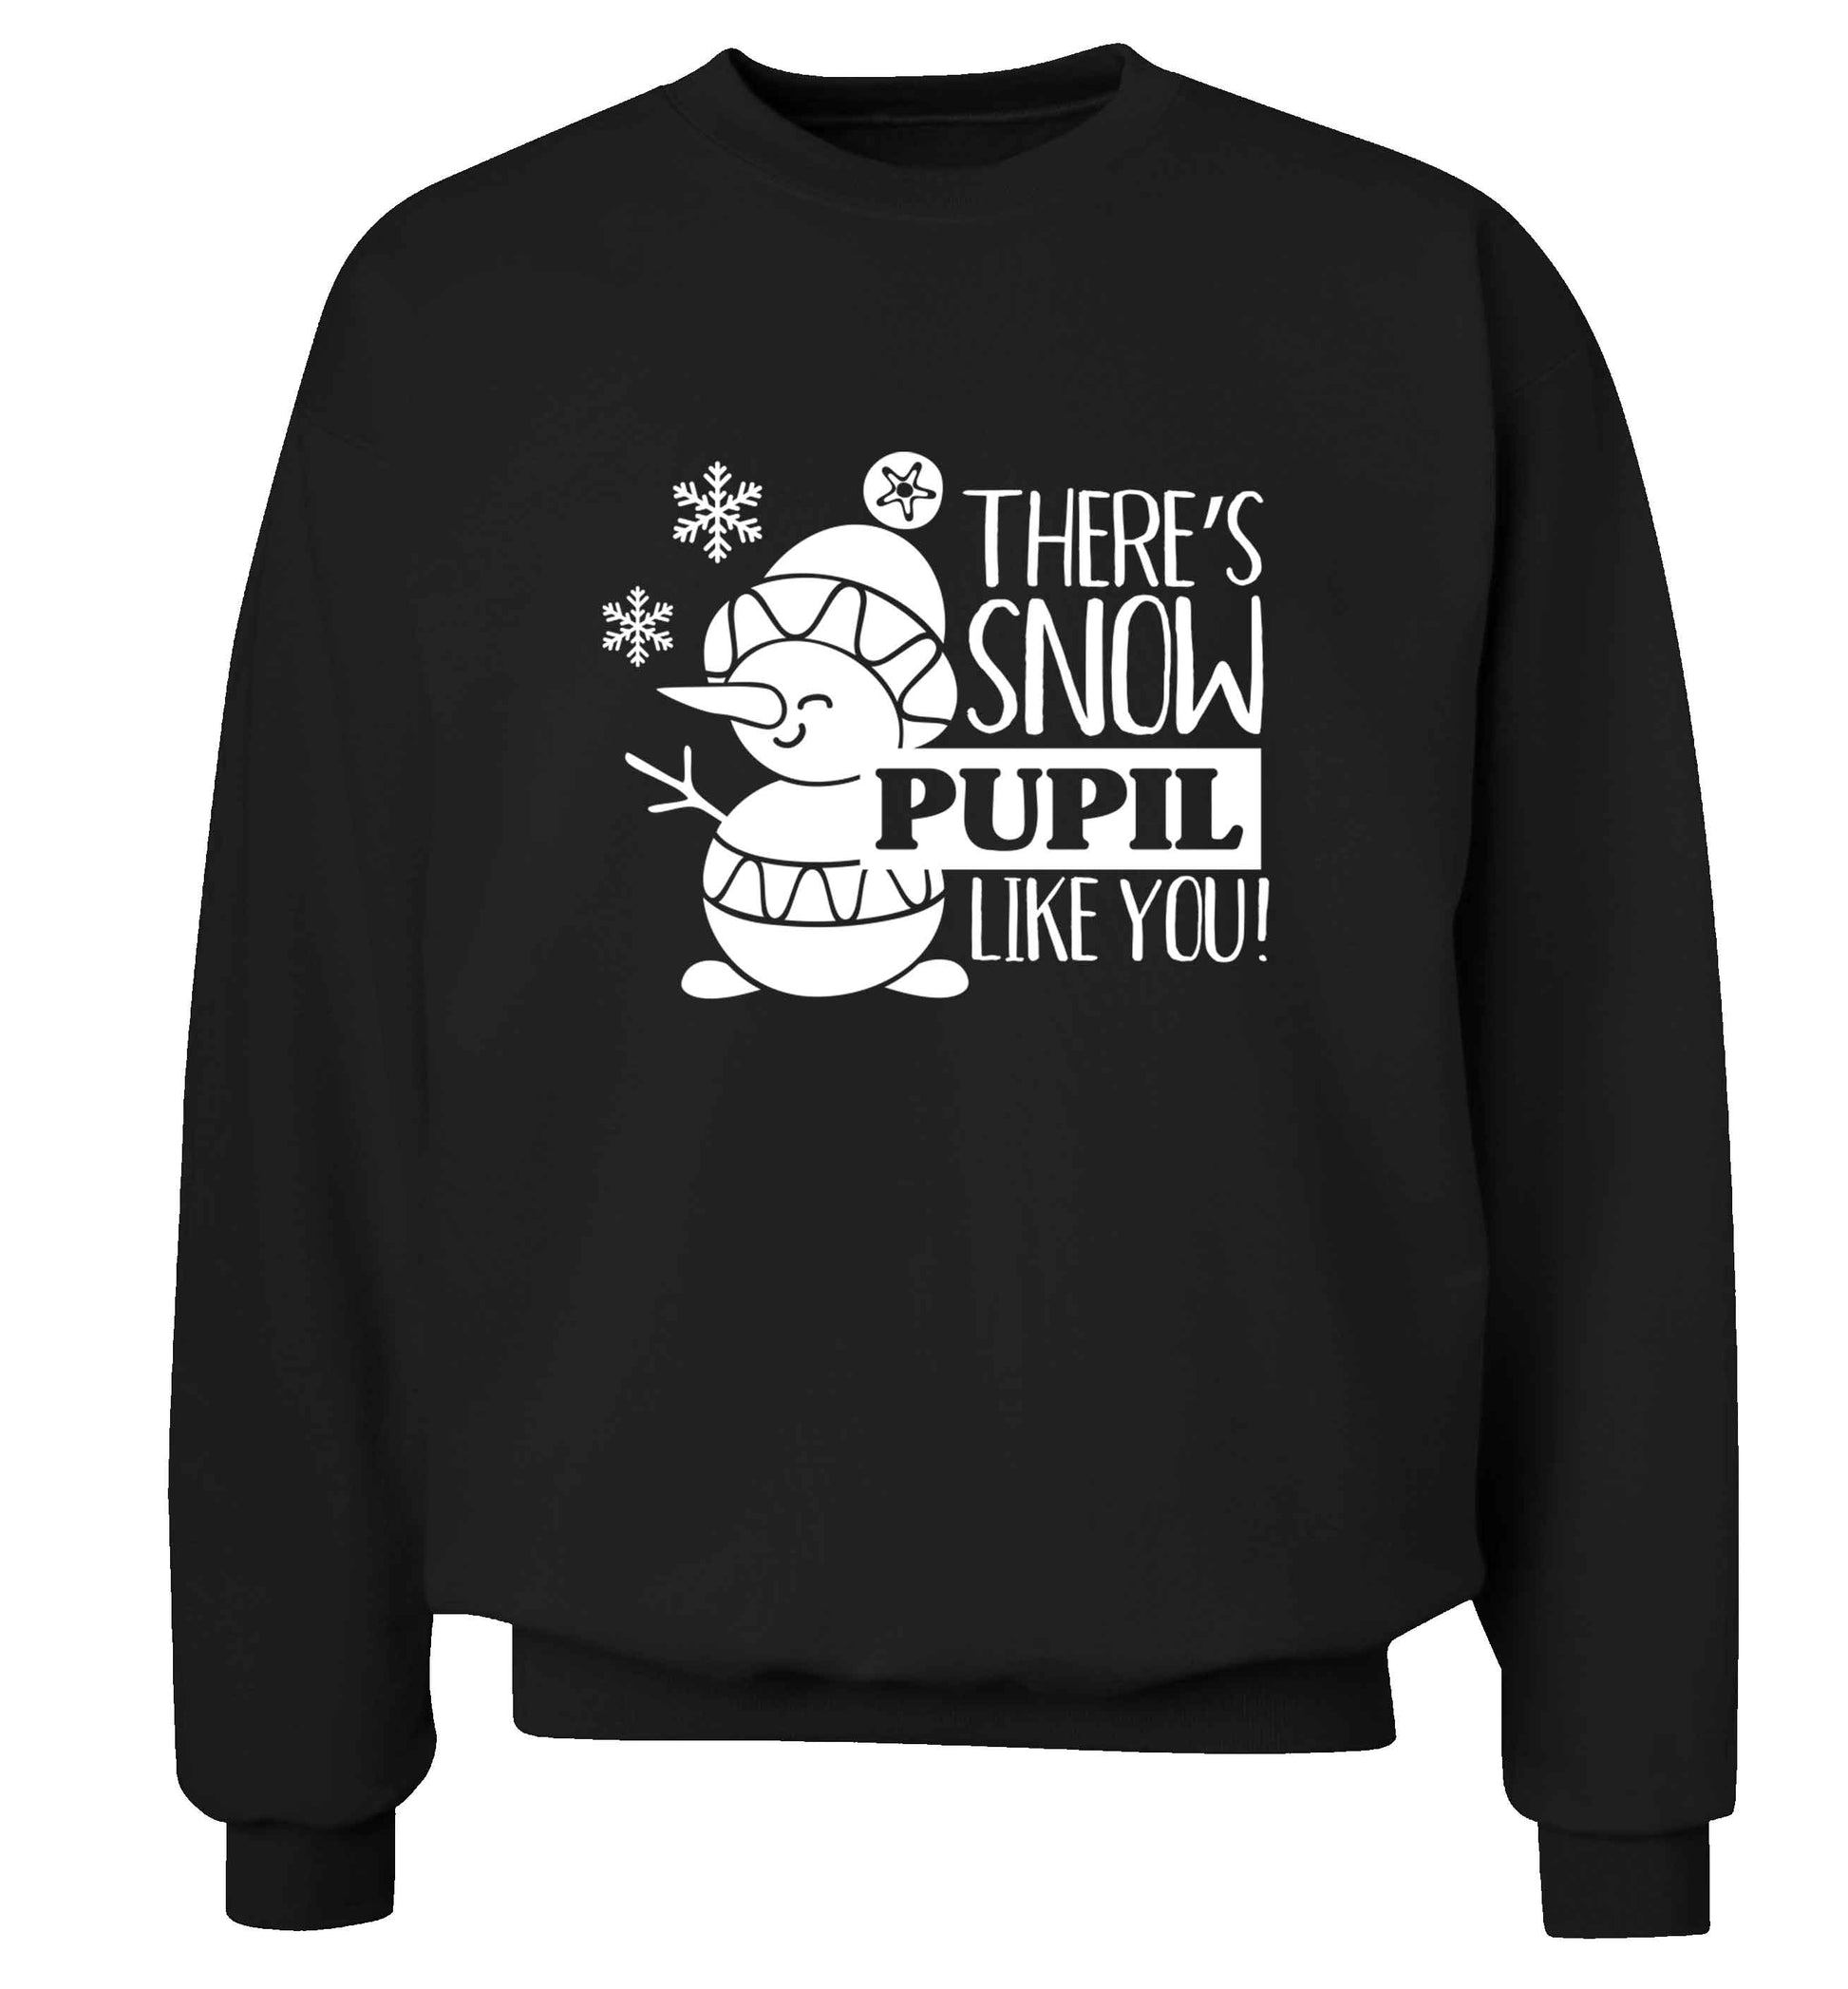 There's snow pupil like you adult's unisex black sweater 2XL